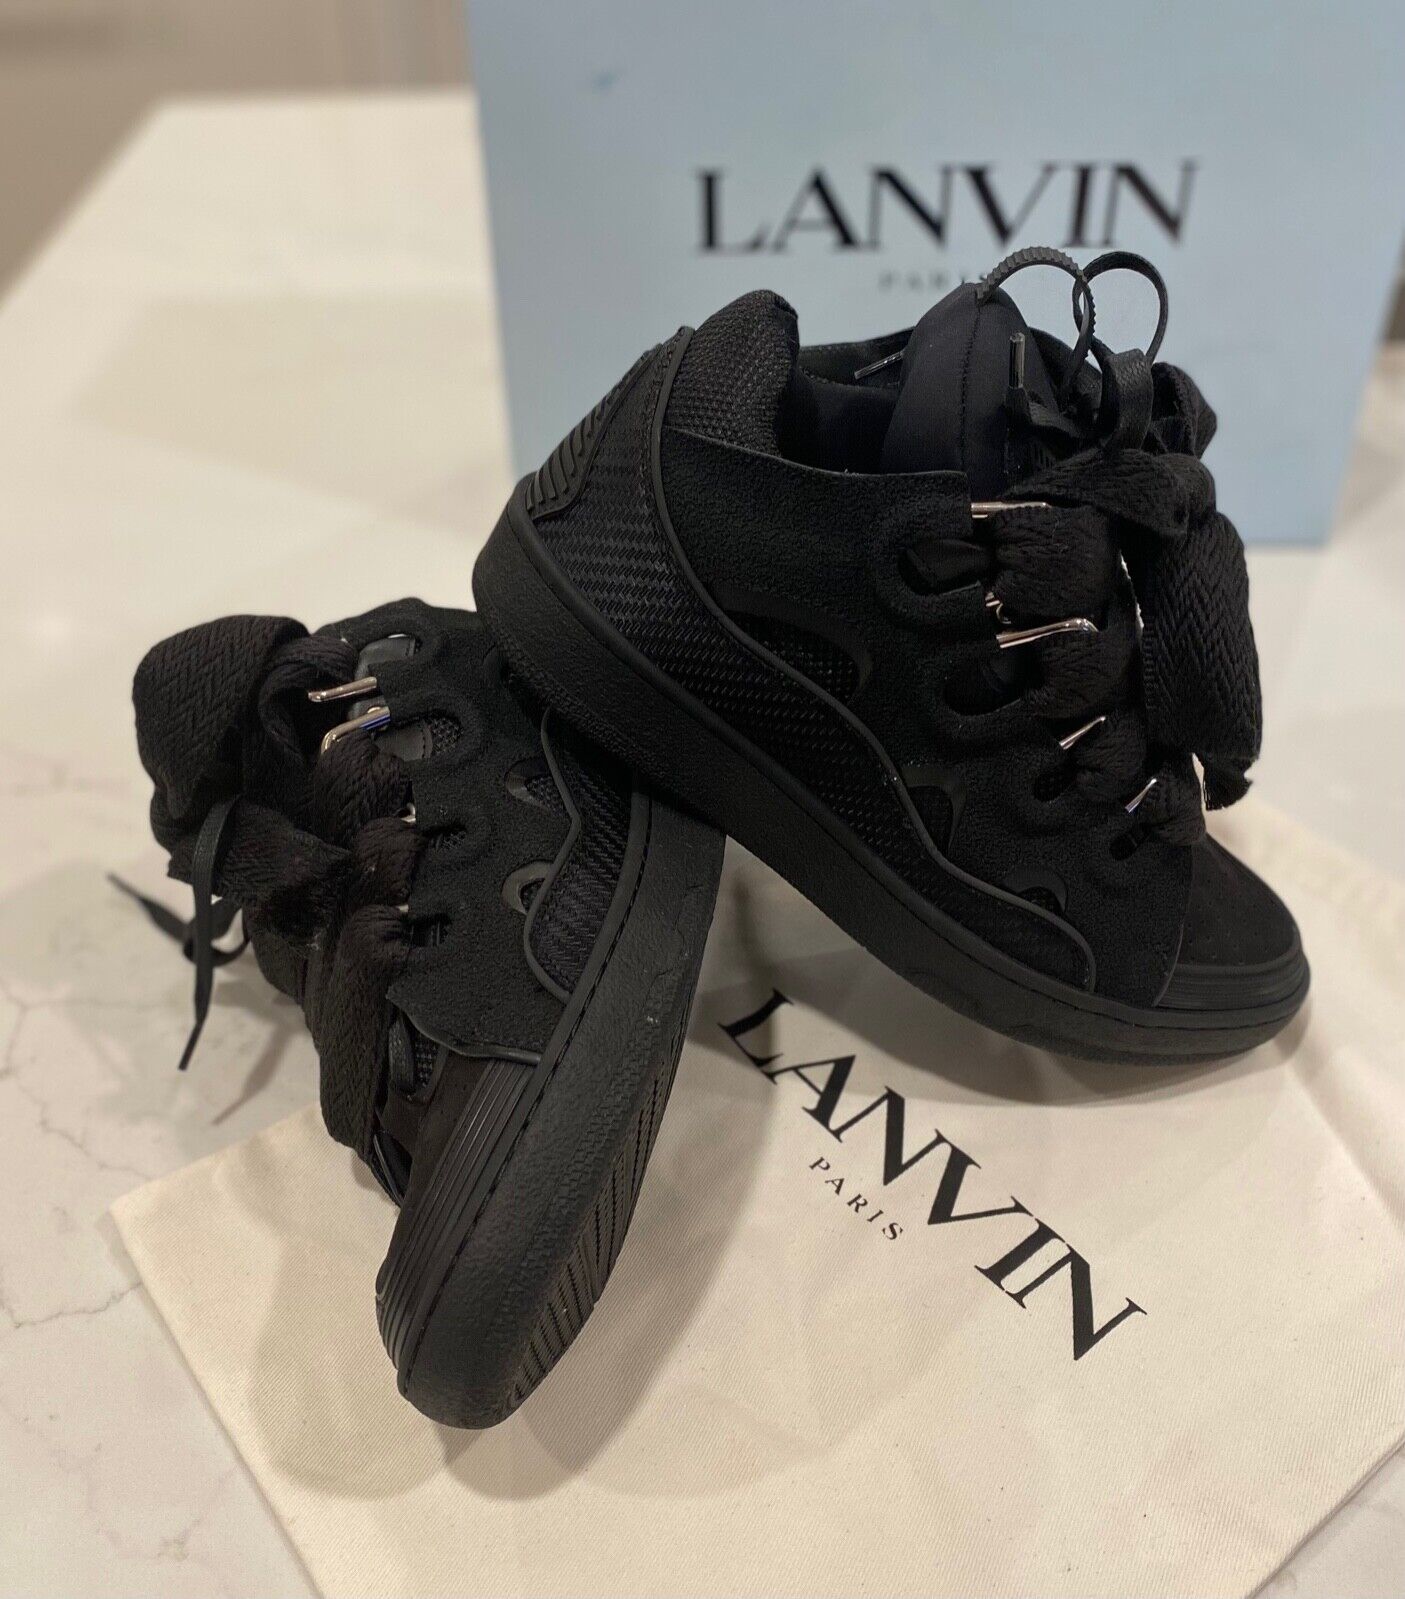 BRAND NEW Lanvin Leather Curb Sneakers Black Size 41/ Mens 8 